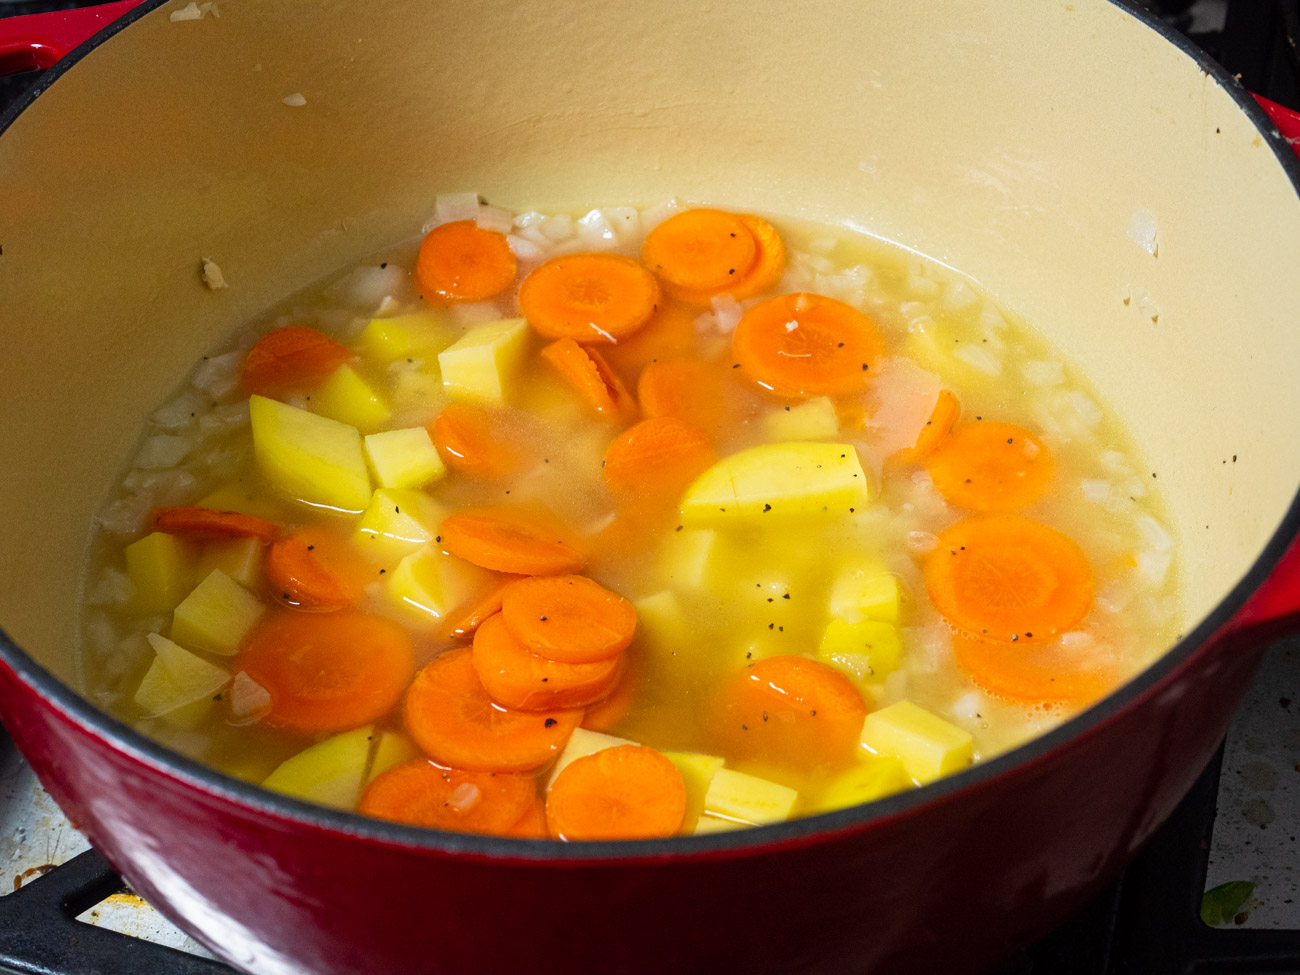 Stir in carrots, potatoes, chicken broth, salt, and pepper. Bring to a boil. Once boiling, cover with a lid and reduce heat to medium-low. Cook for 15 minutes.